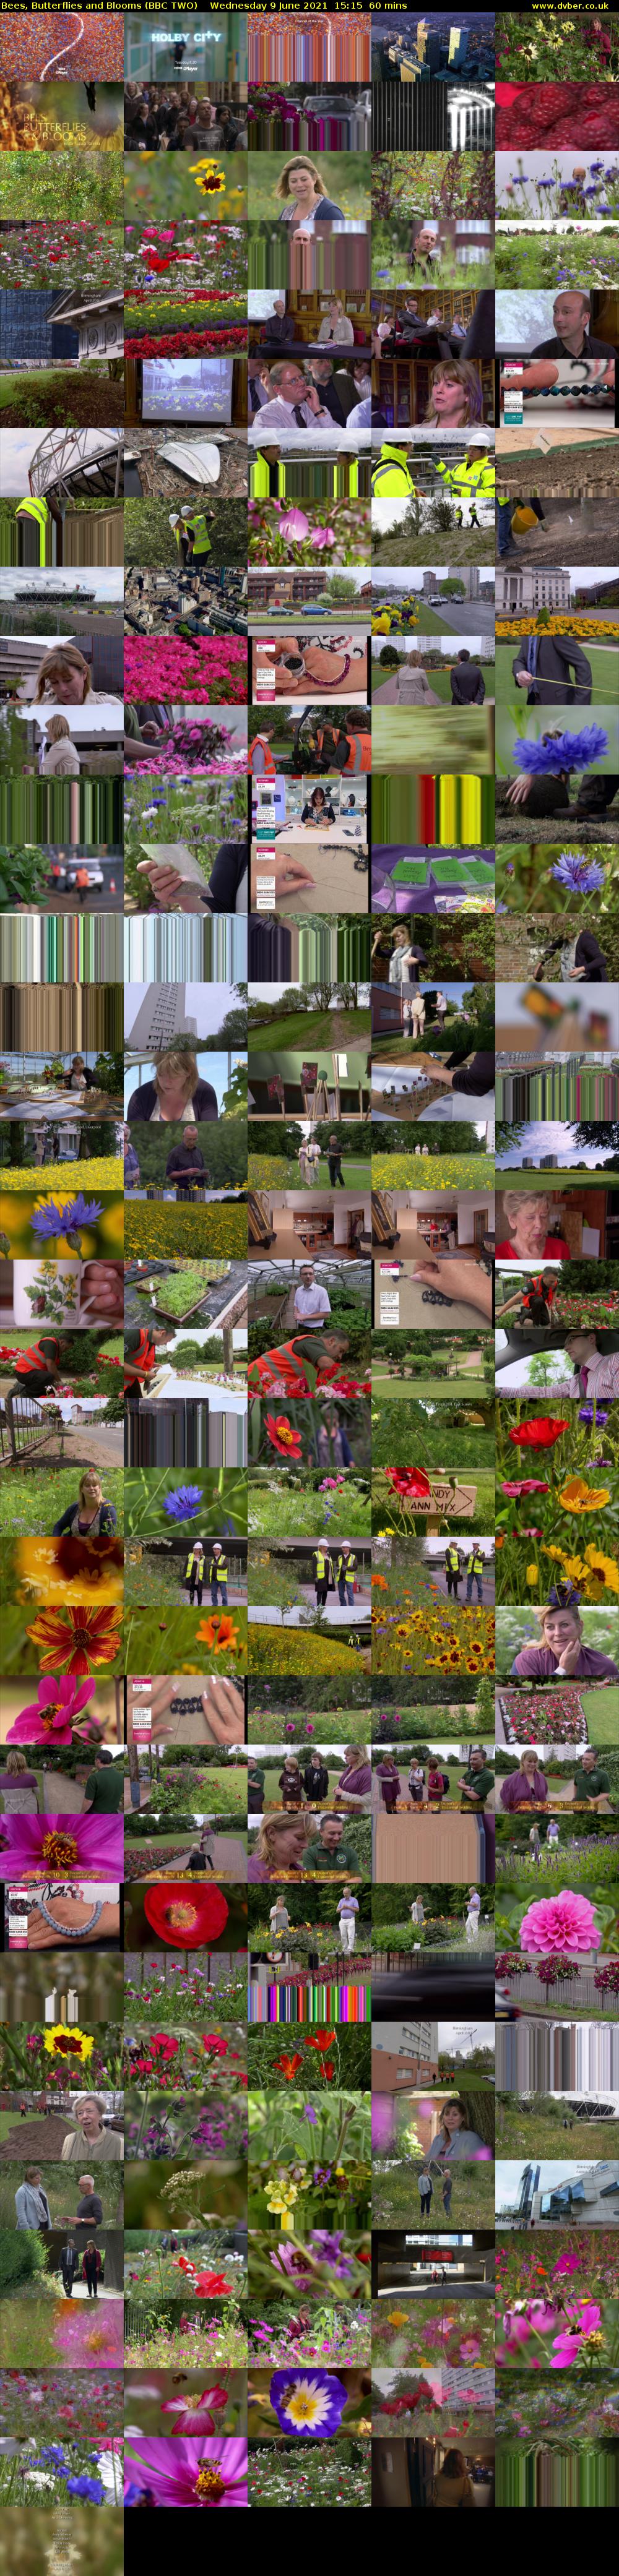 Bees, Butterflies and Blooms (BBC TWO) Wednesday 9 June 2021 15:15 - 16:15